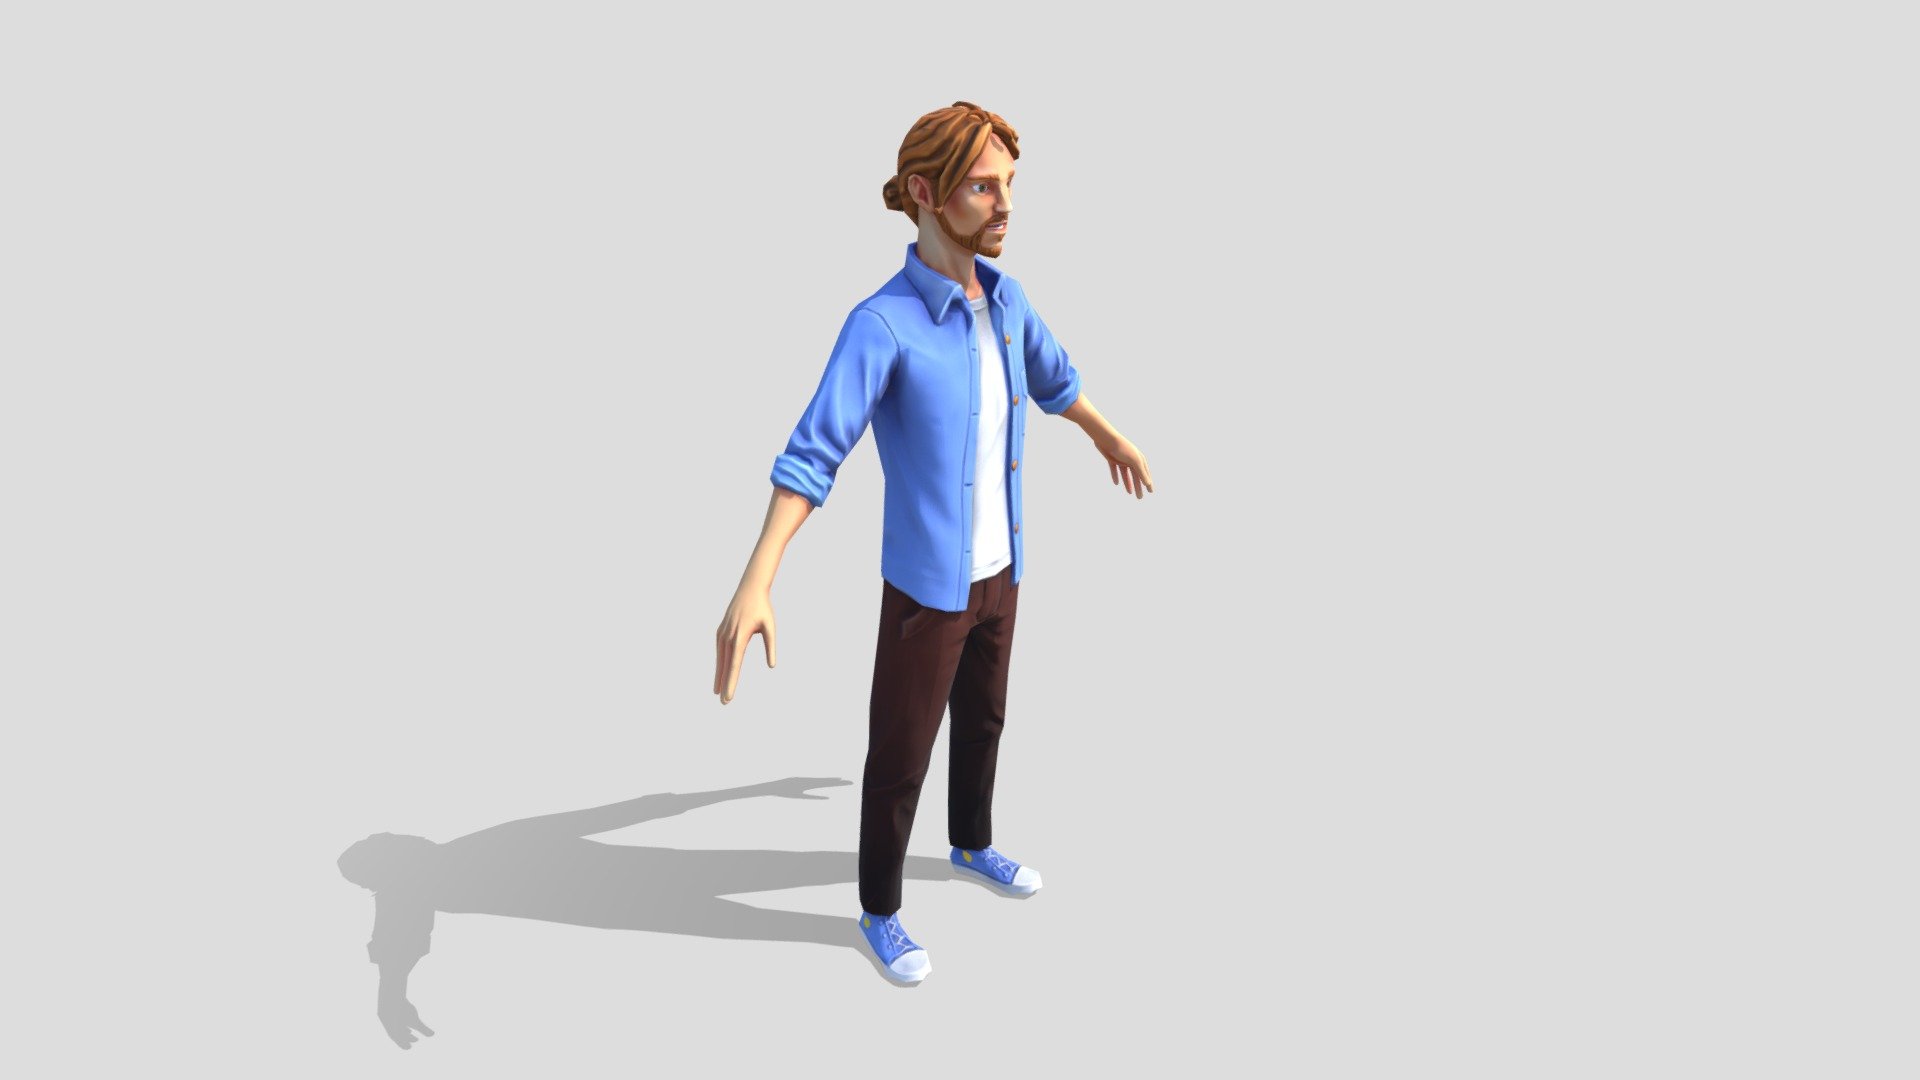 game character 3d model free download